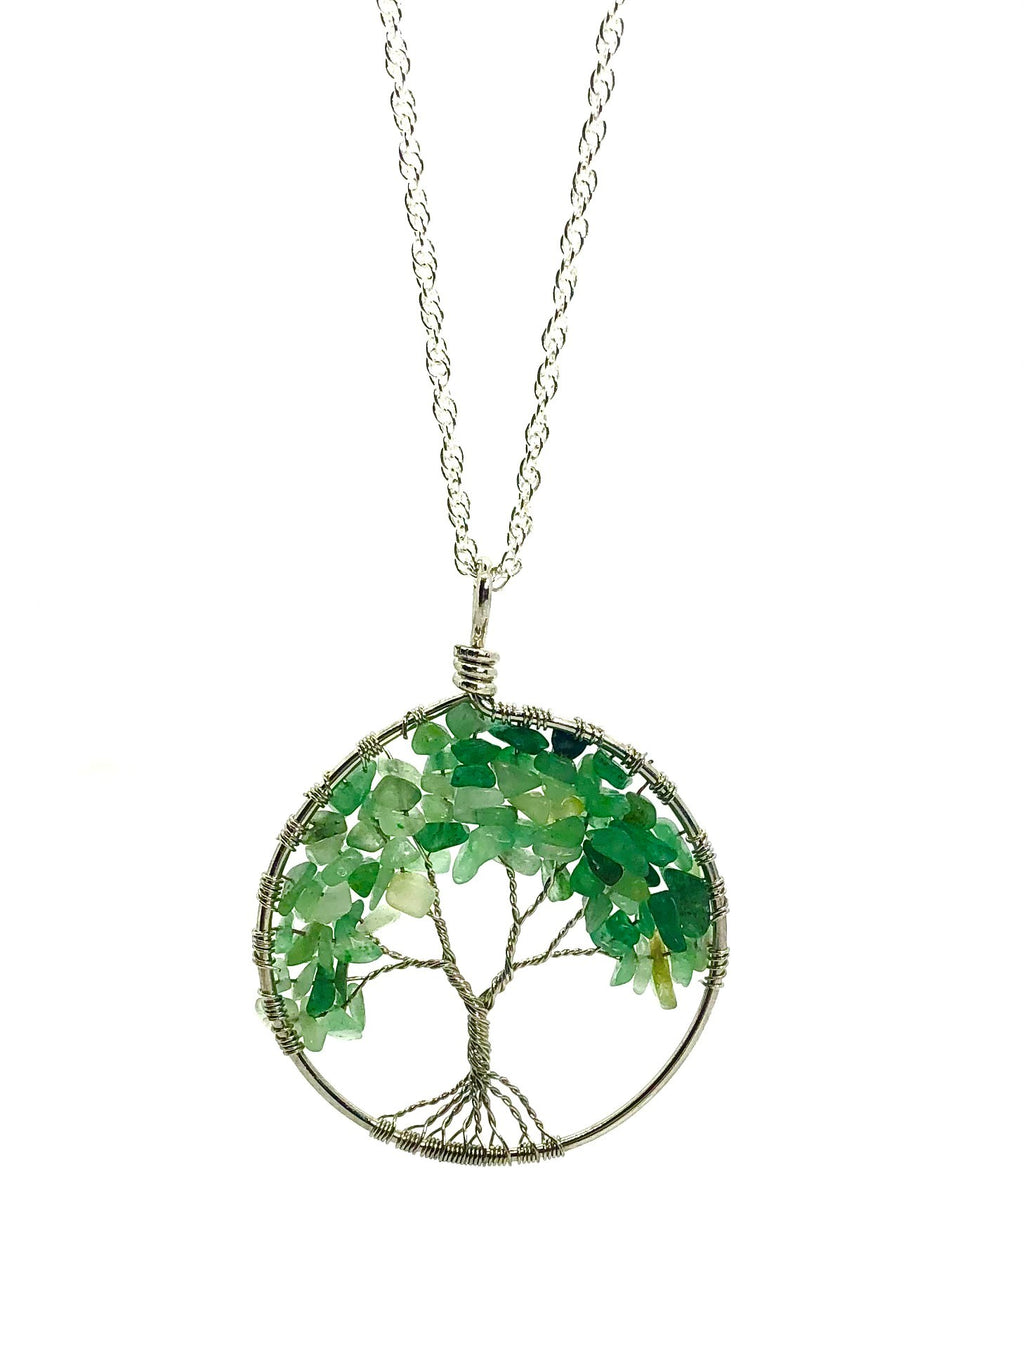 Chain Necklace - Silver with Hand-wired Tree of Life Pendant